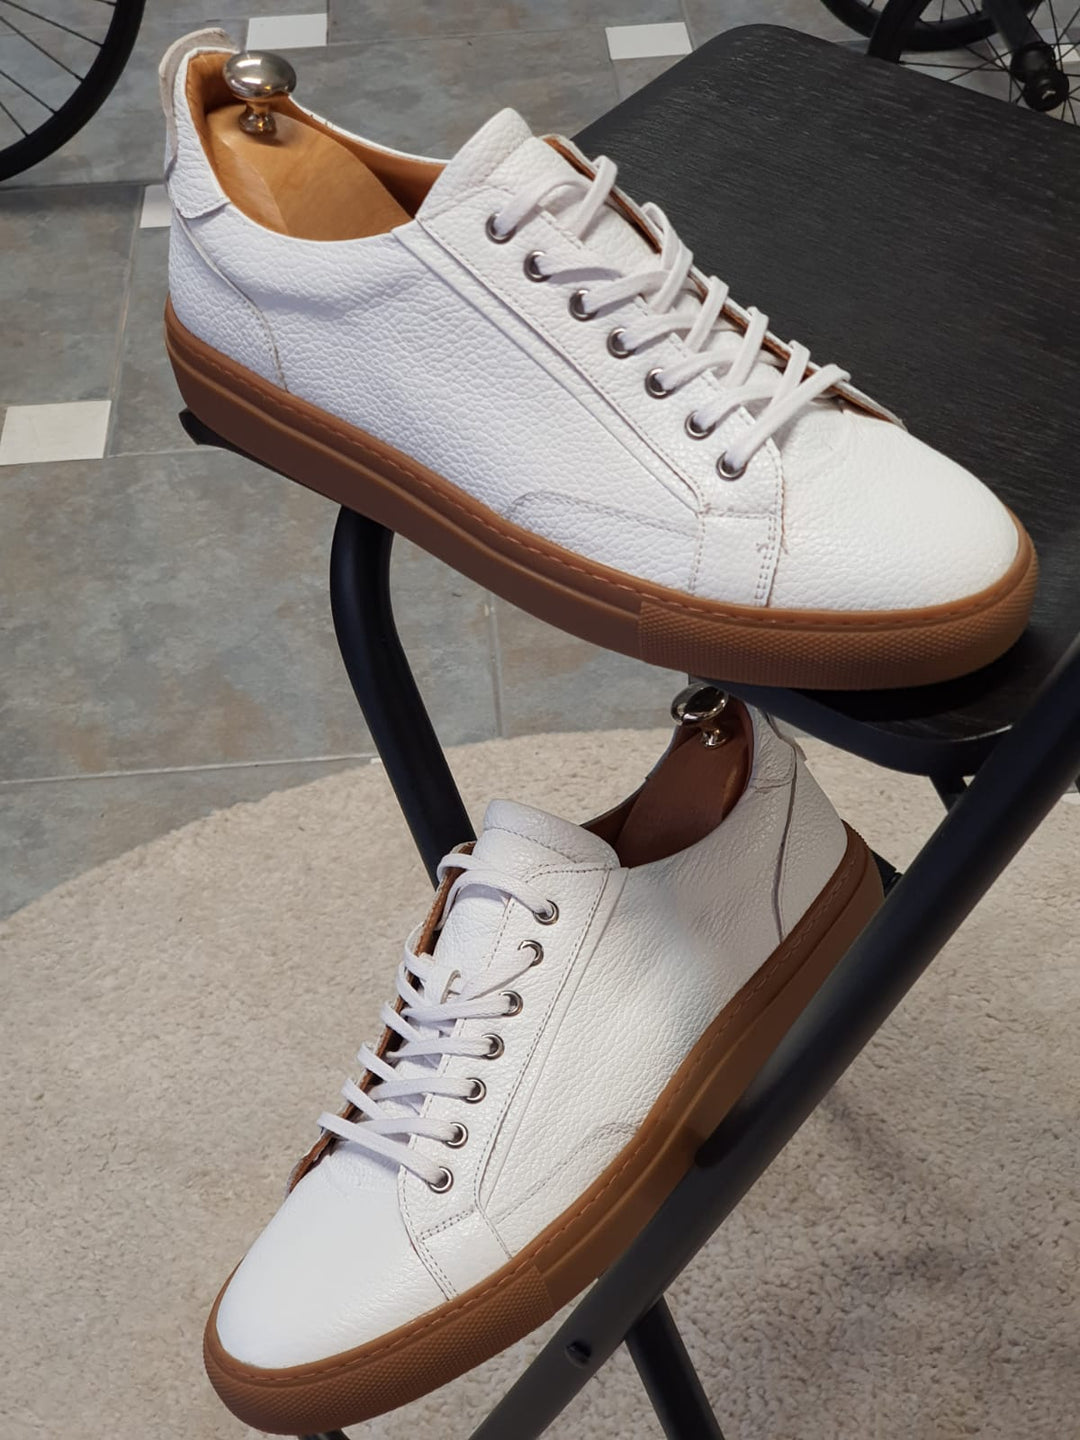 Ralph MenStyleWith Eva Sole Lace Up White Leather Sneakers - MENSTYLEWITH